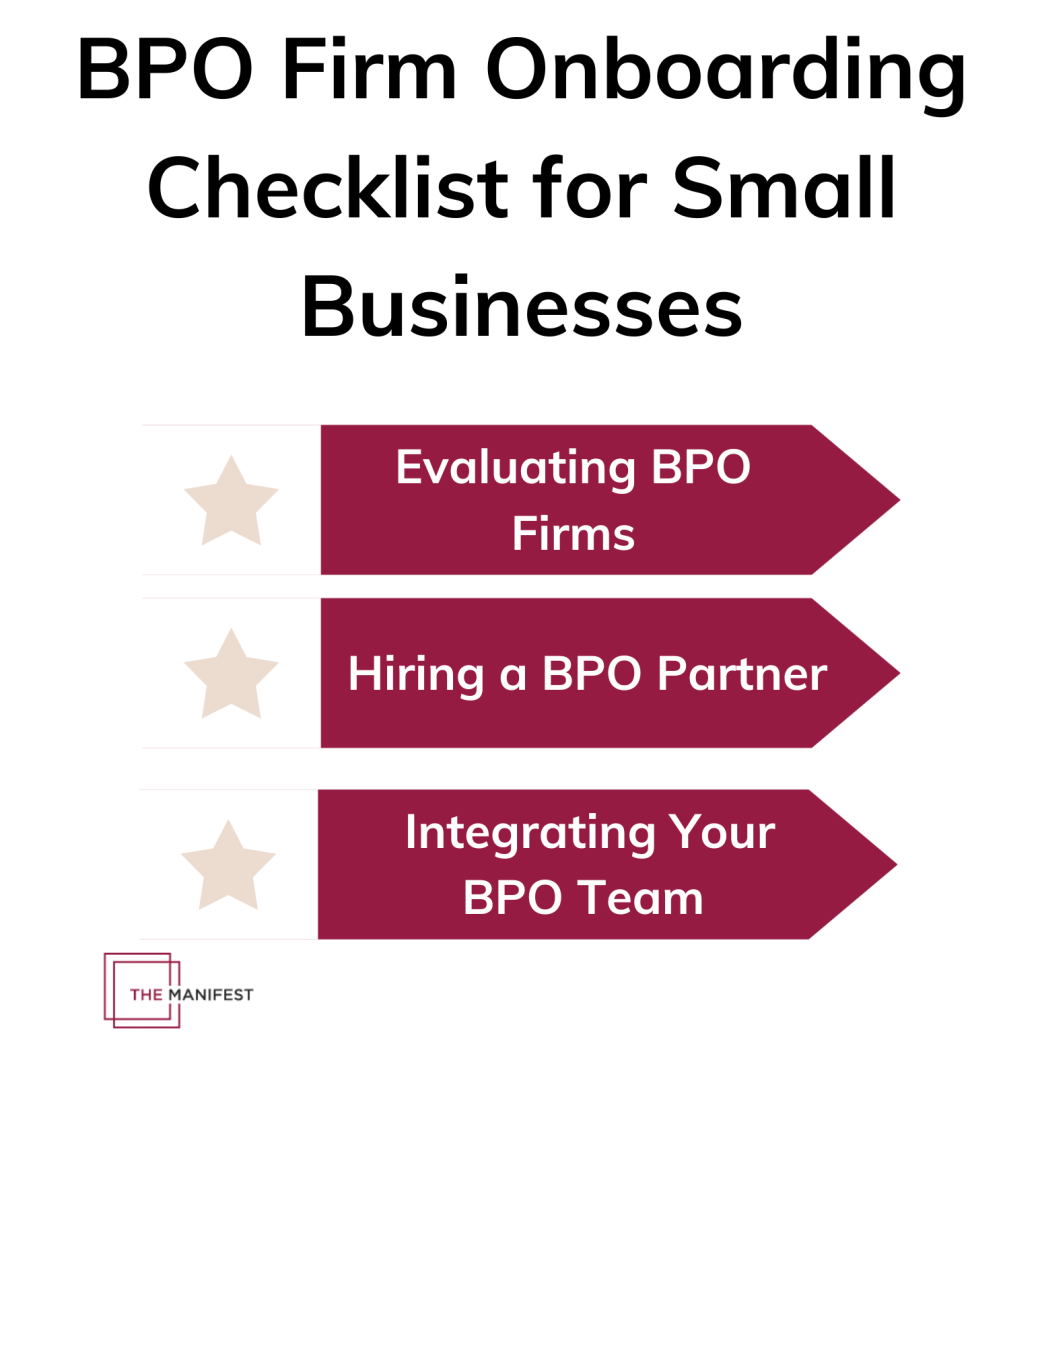 BPO Firm Onboarding Checklist For Small Businesses